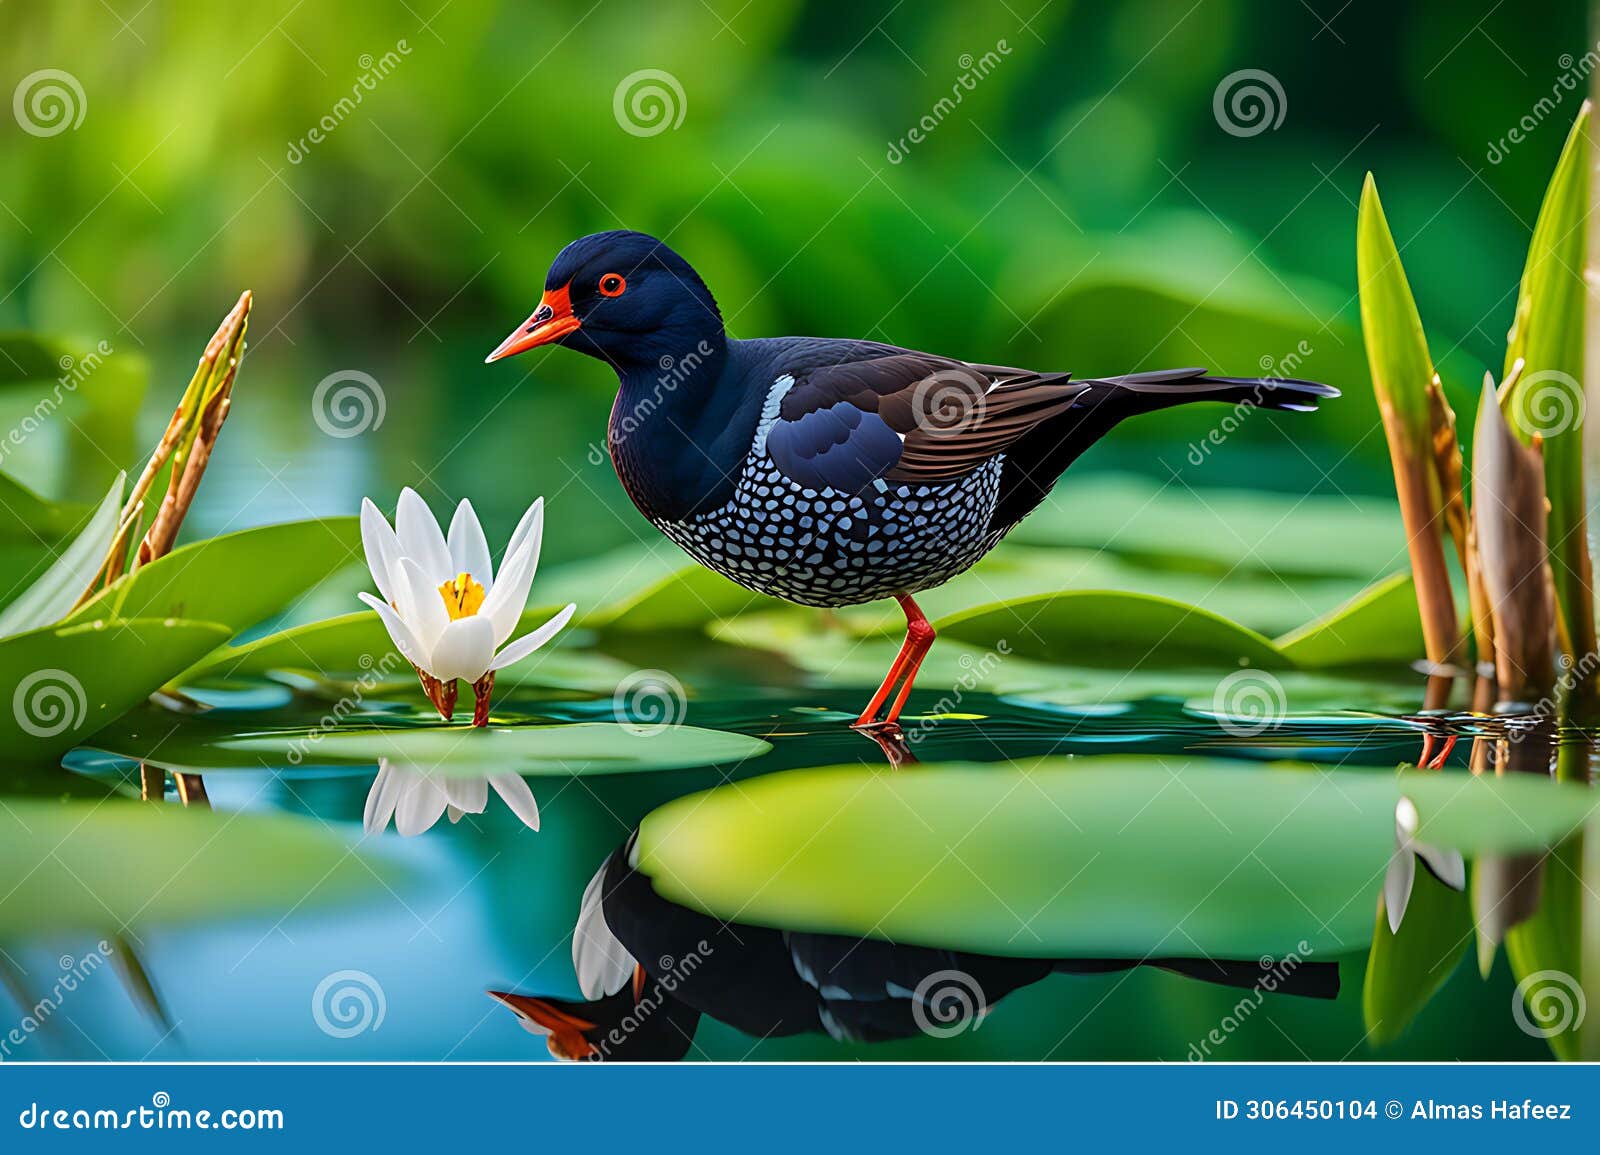 serene wetland stroll: common moorhen strides with precision focus, every feature mirrored in nature's calm